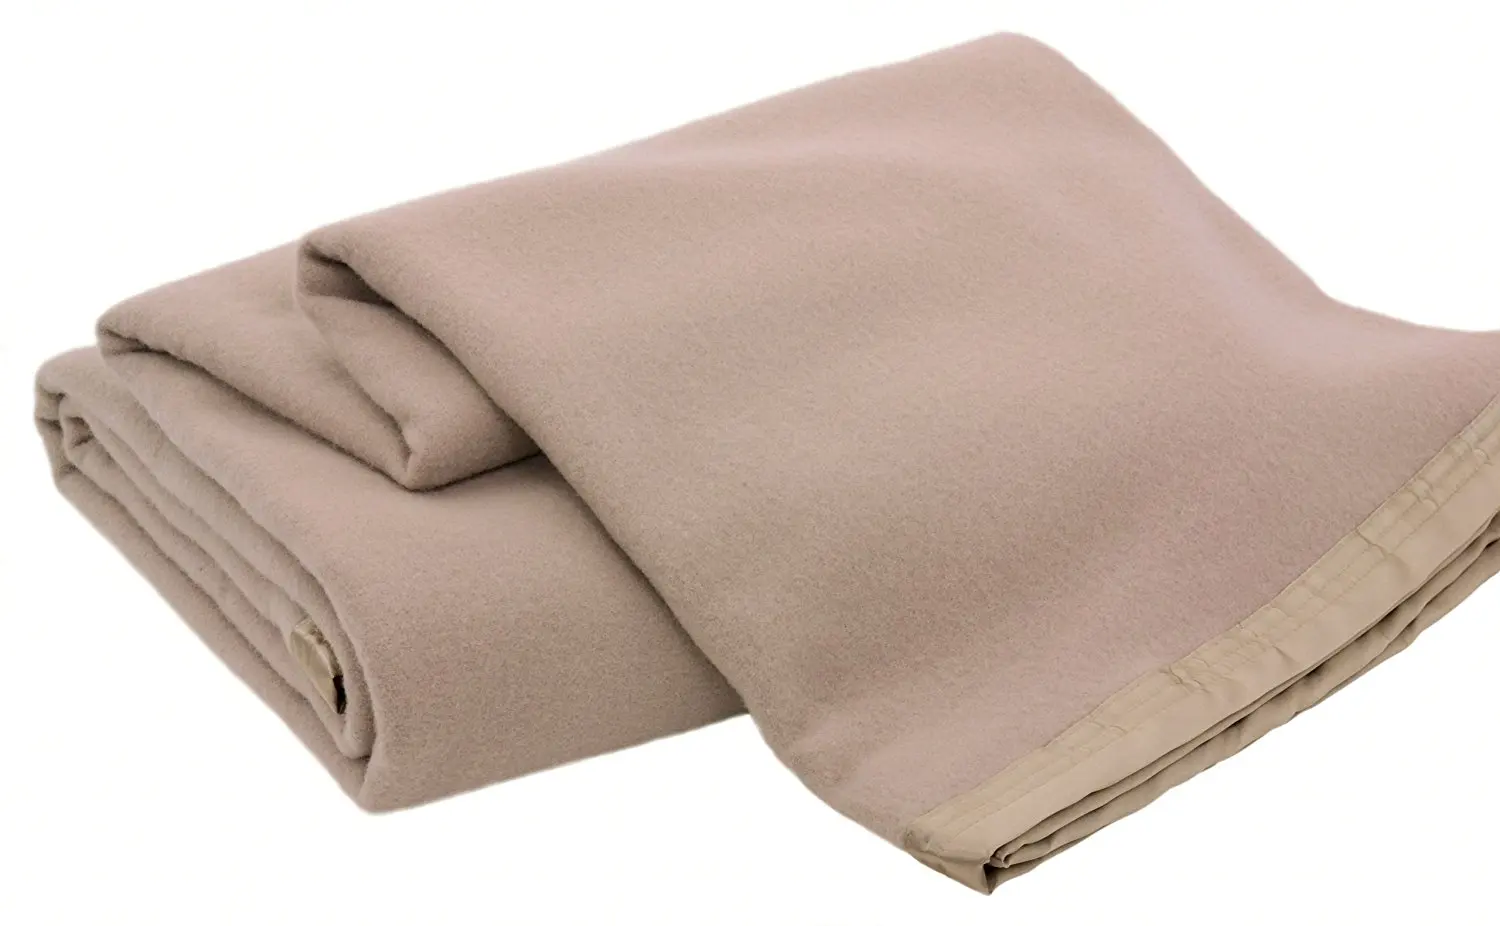 Cheap 100 Wool Military Blanket, find 100 Wool Military Blanket deals ...